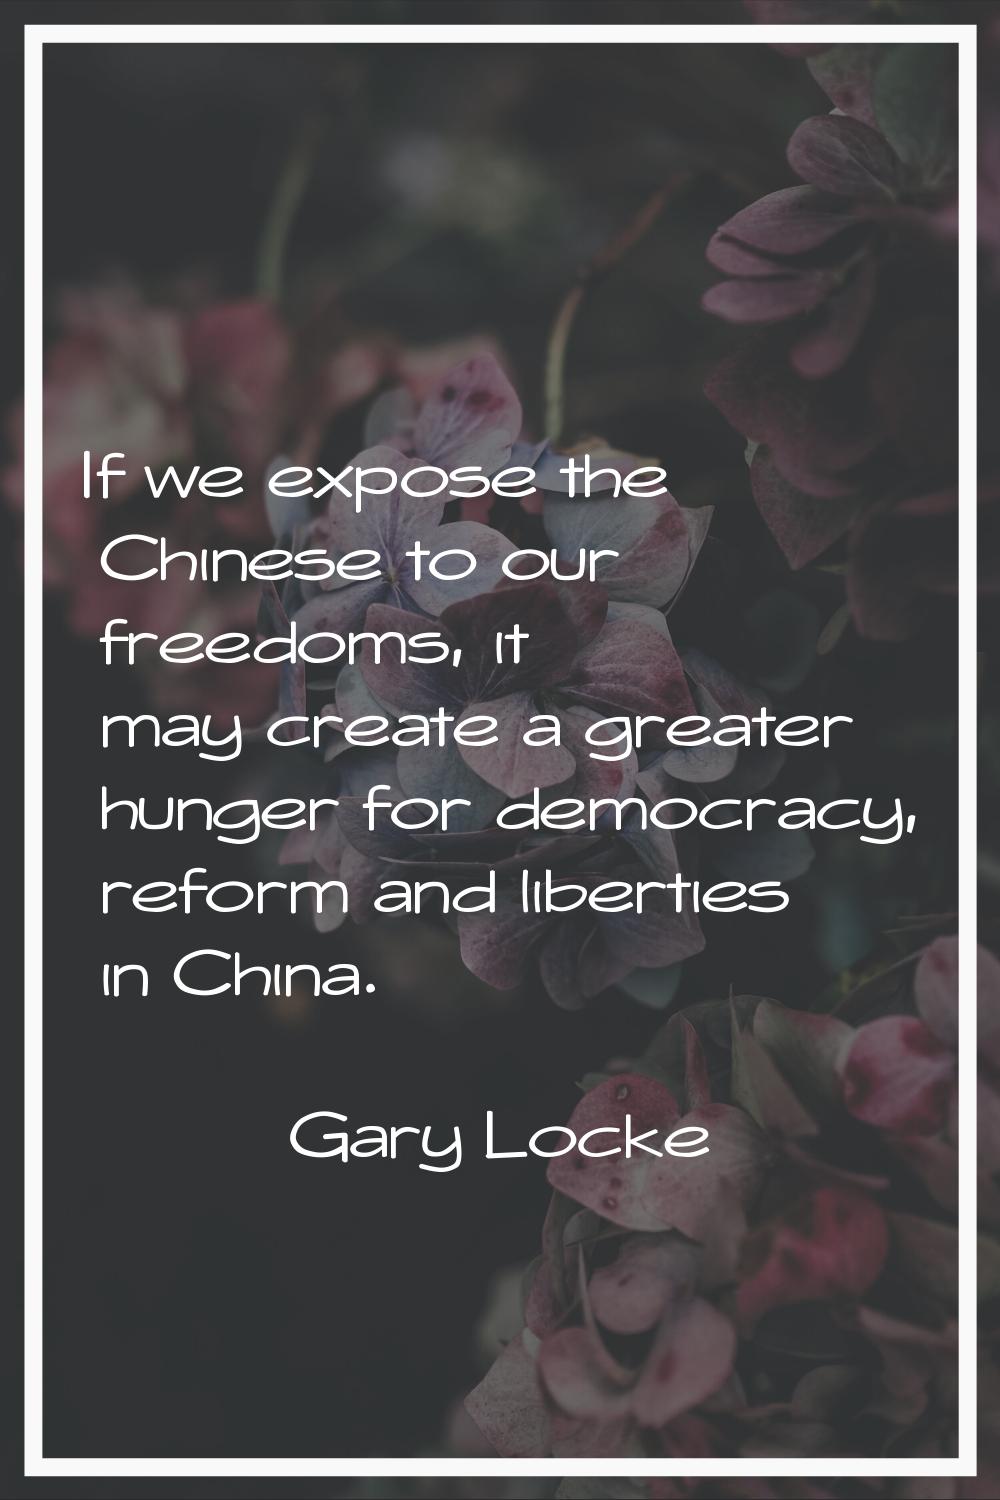 If we expose the Chinese to our freedoms, it may create a greater hunger for democracy, reform and 